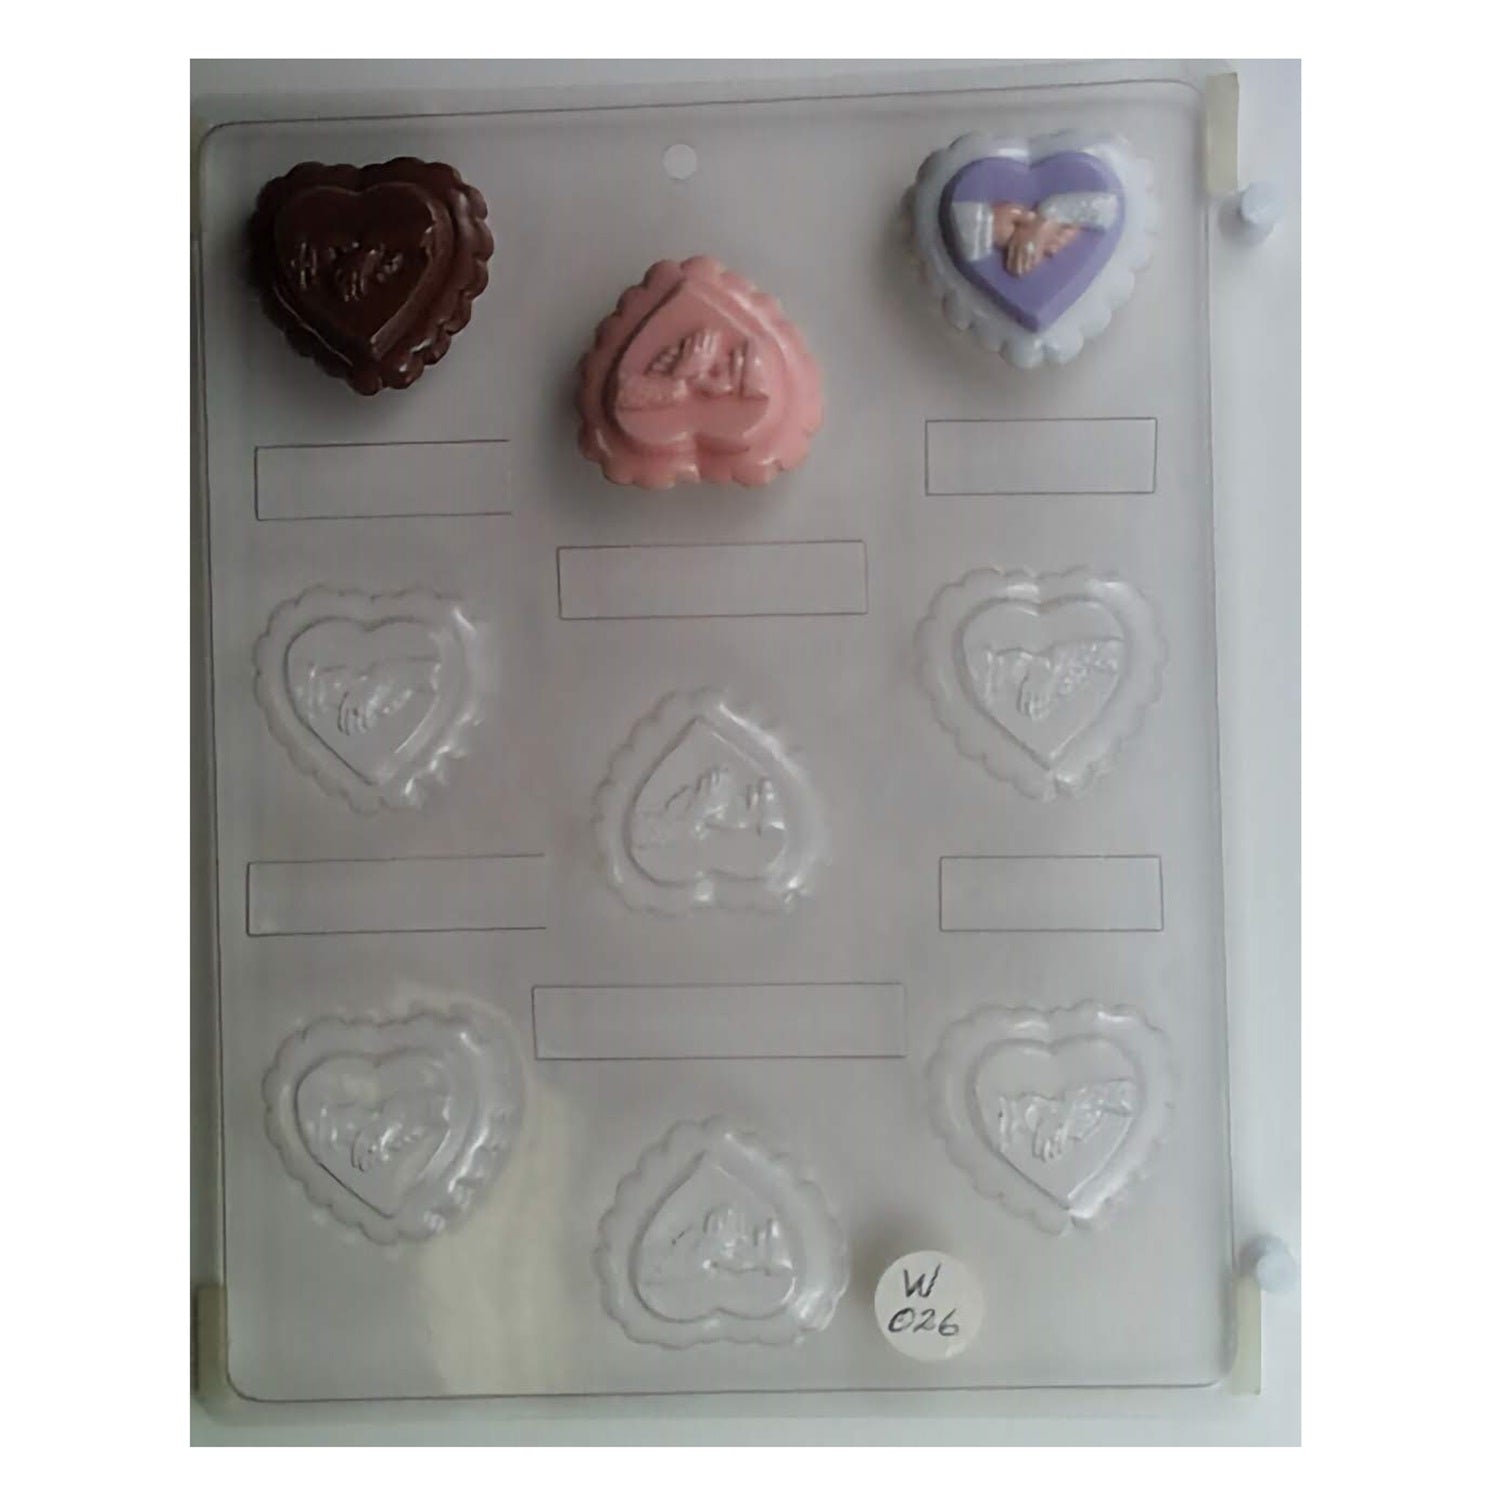 This chocolate mold captures the romantic essence of a wedding with its heart shape formed by two hands, symbolizing unity and love, ideal for wedding receptions or engagement party chocolates.